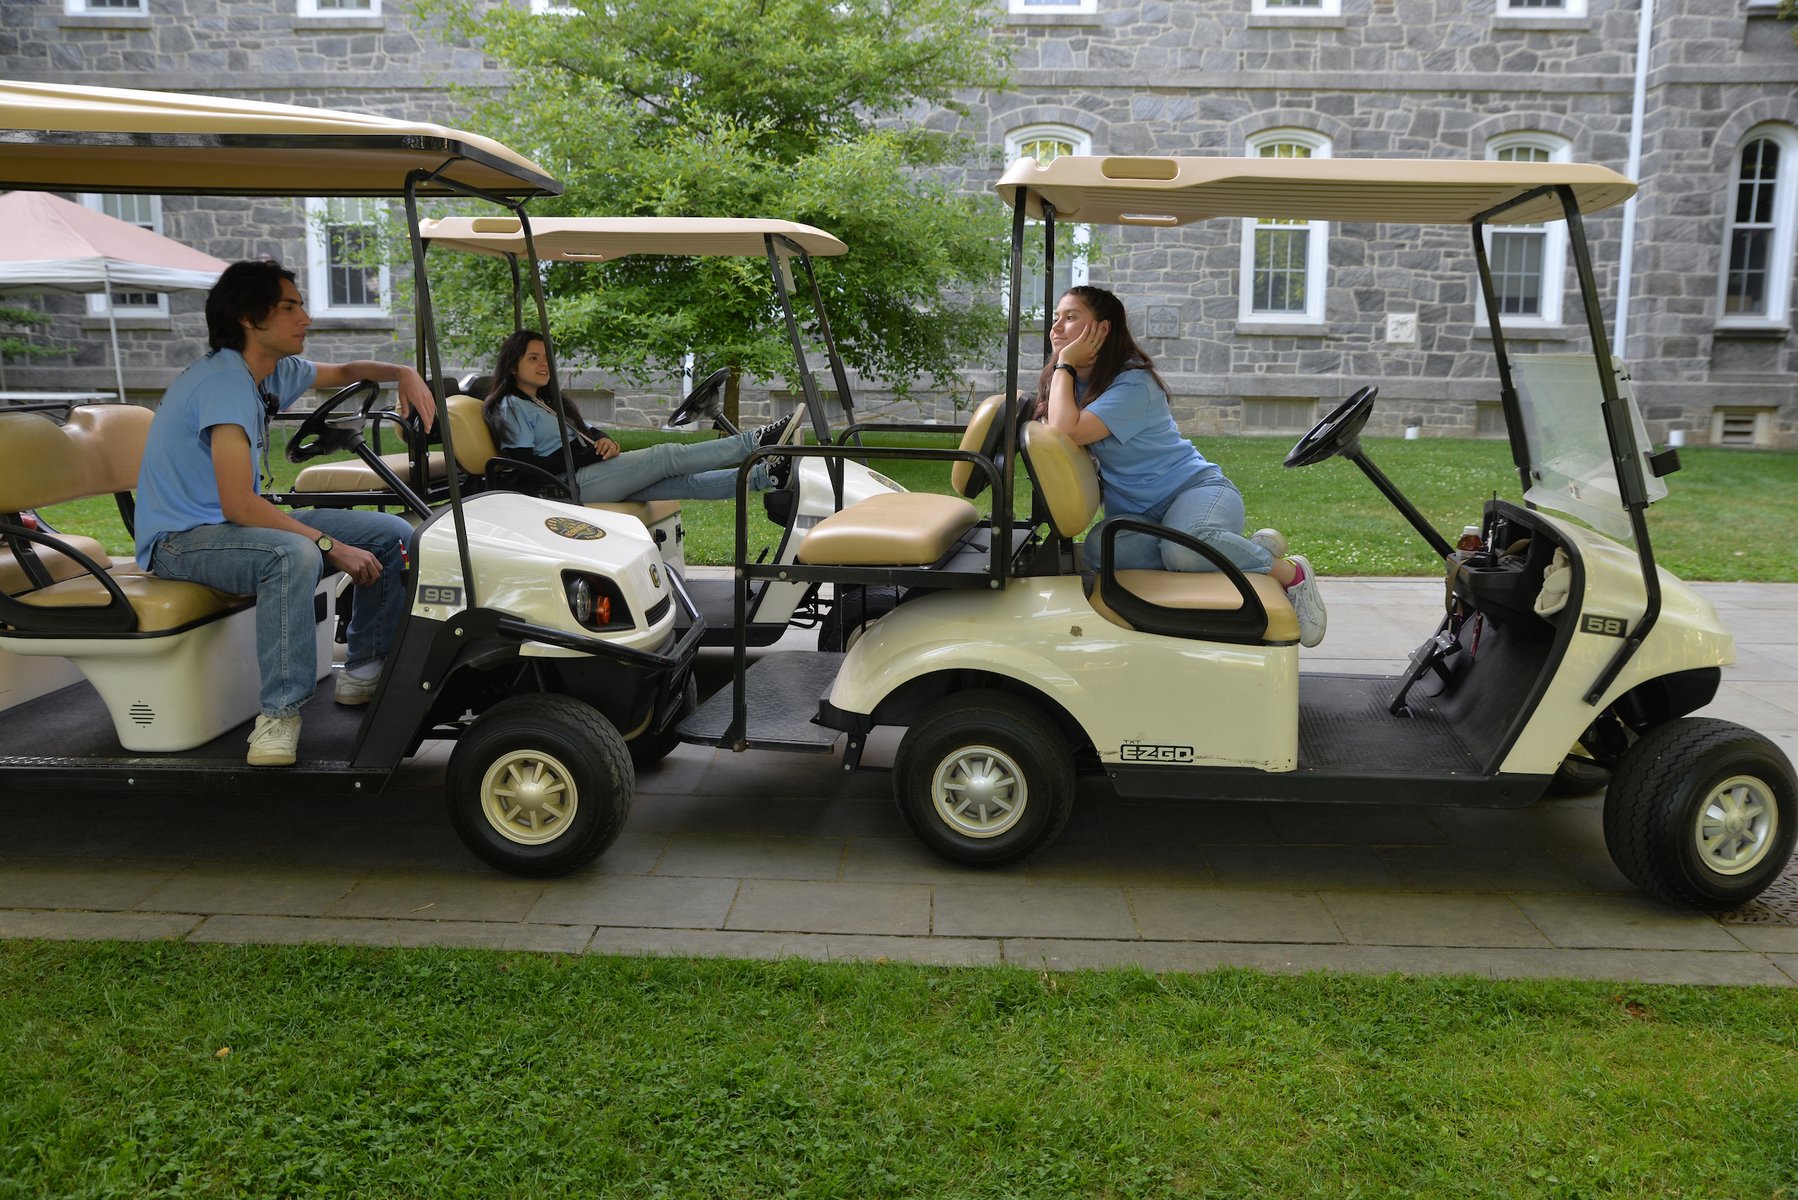 Students wait for passengers in their golf carts